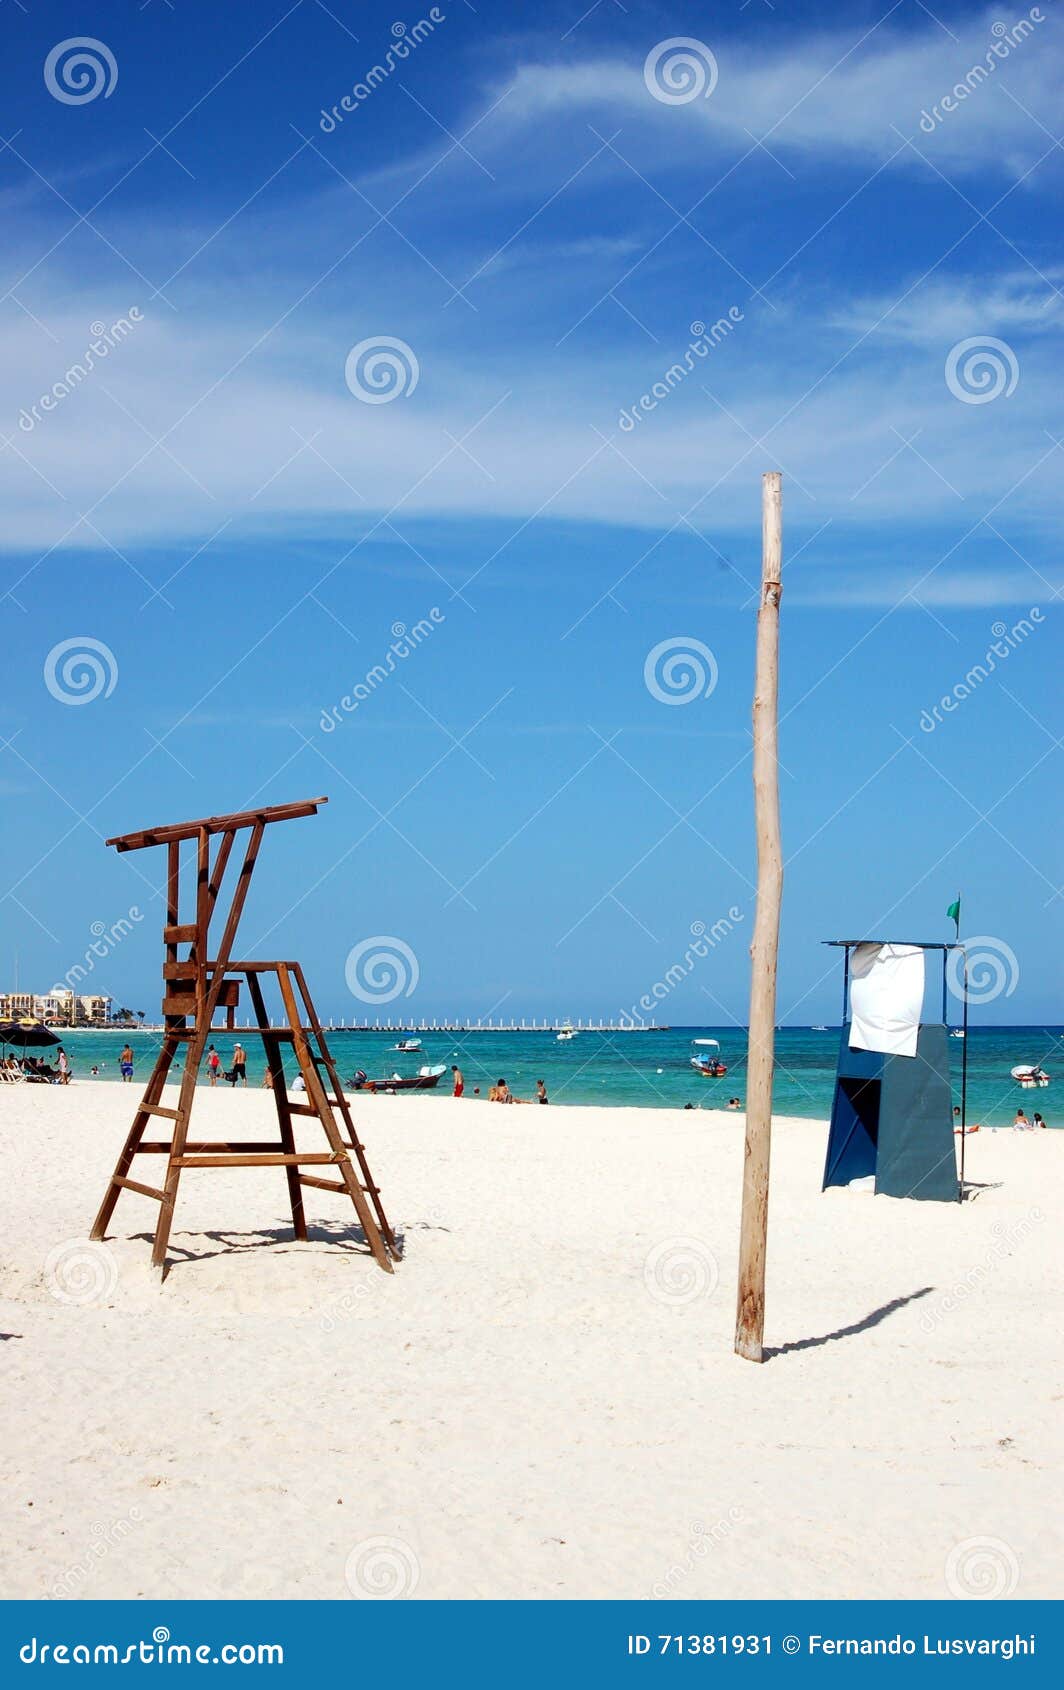 Playa del Carmen. Such an amazing day in Mexico, Mayan Riviera that even the lifeguard left his set to refresh a bit.